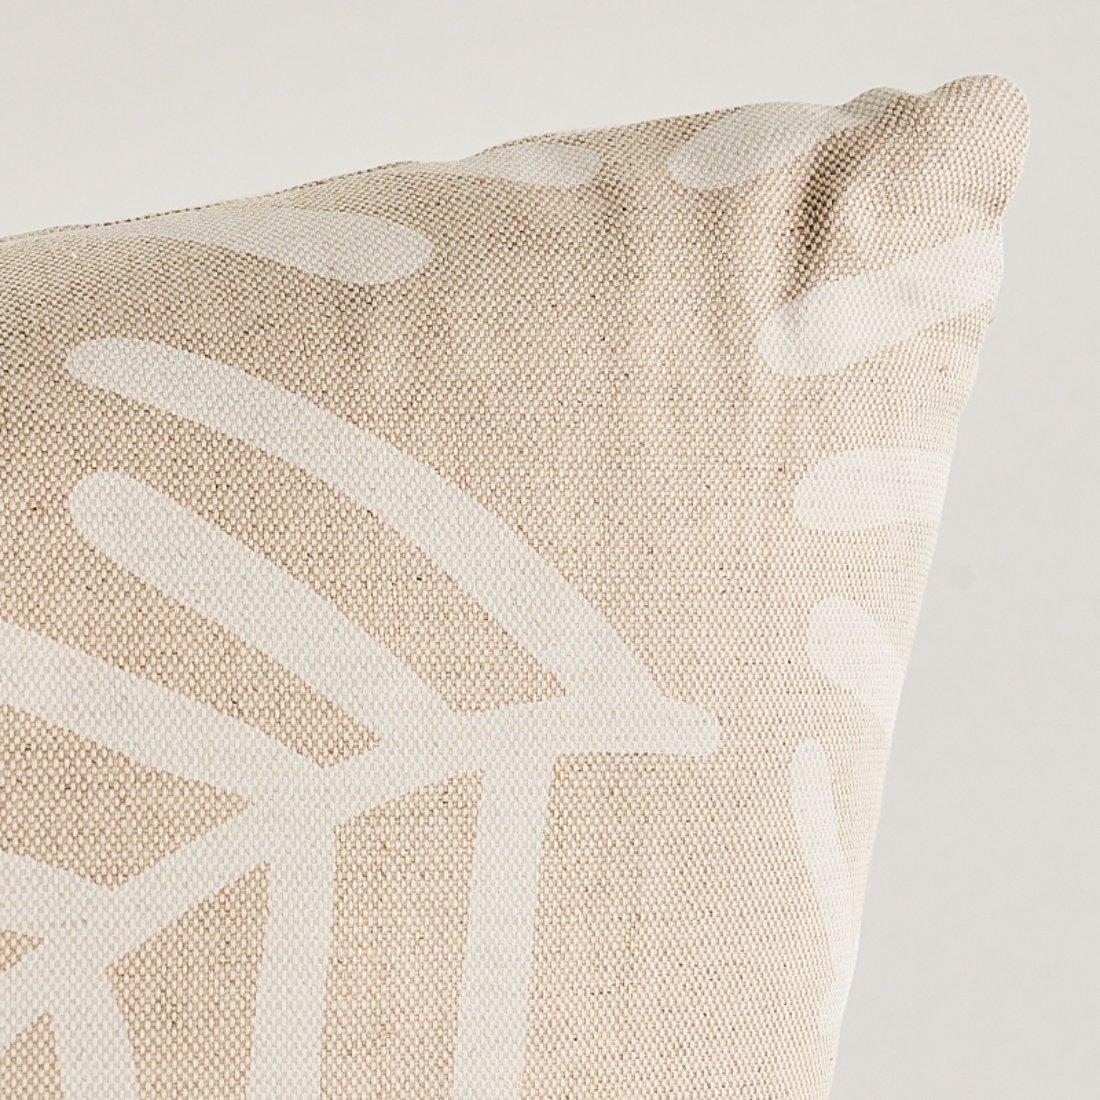 This pillow features Tiah Cover by Caroline Hurley for Schumacher with a knife edge finish. Tiah Cove was designed by artist Caroline Z Hurley in her Brooklyn studio. Both organic and graphic, this ivory-on-natural profusion of lanky abstract ferns